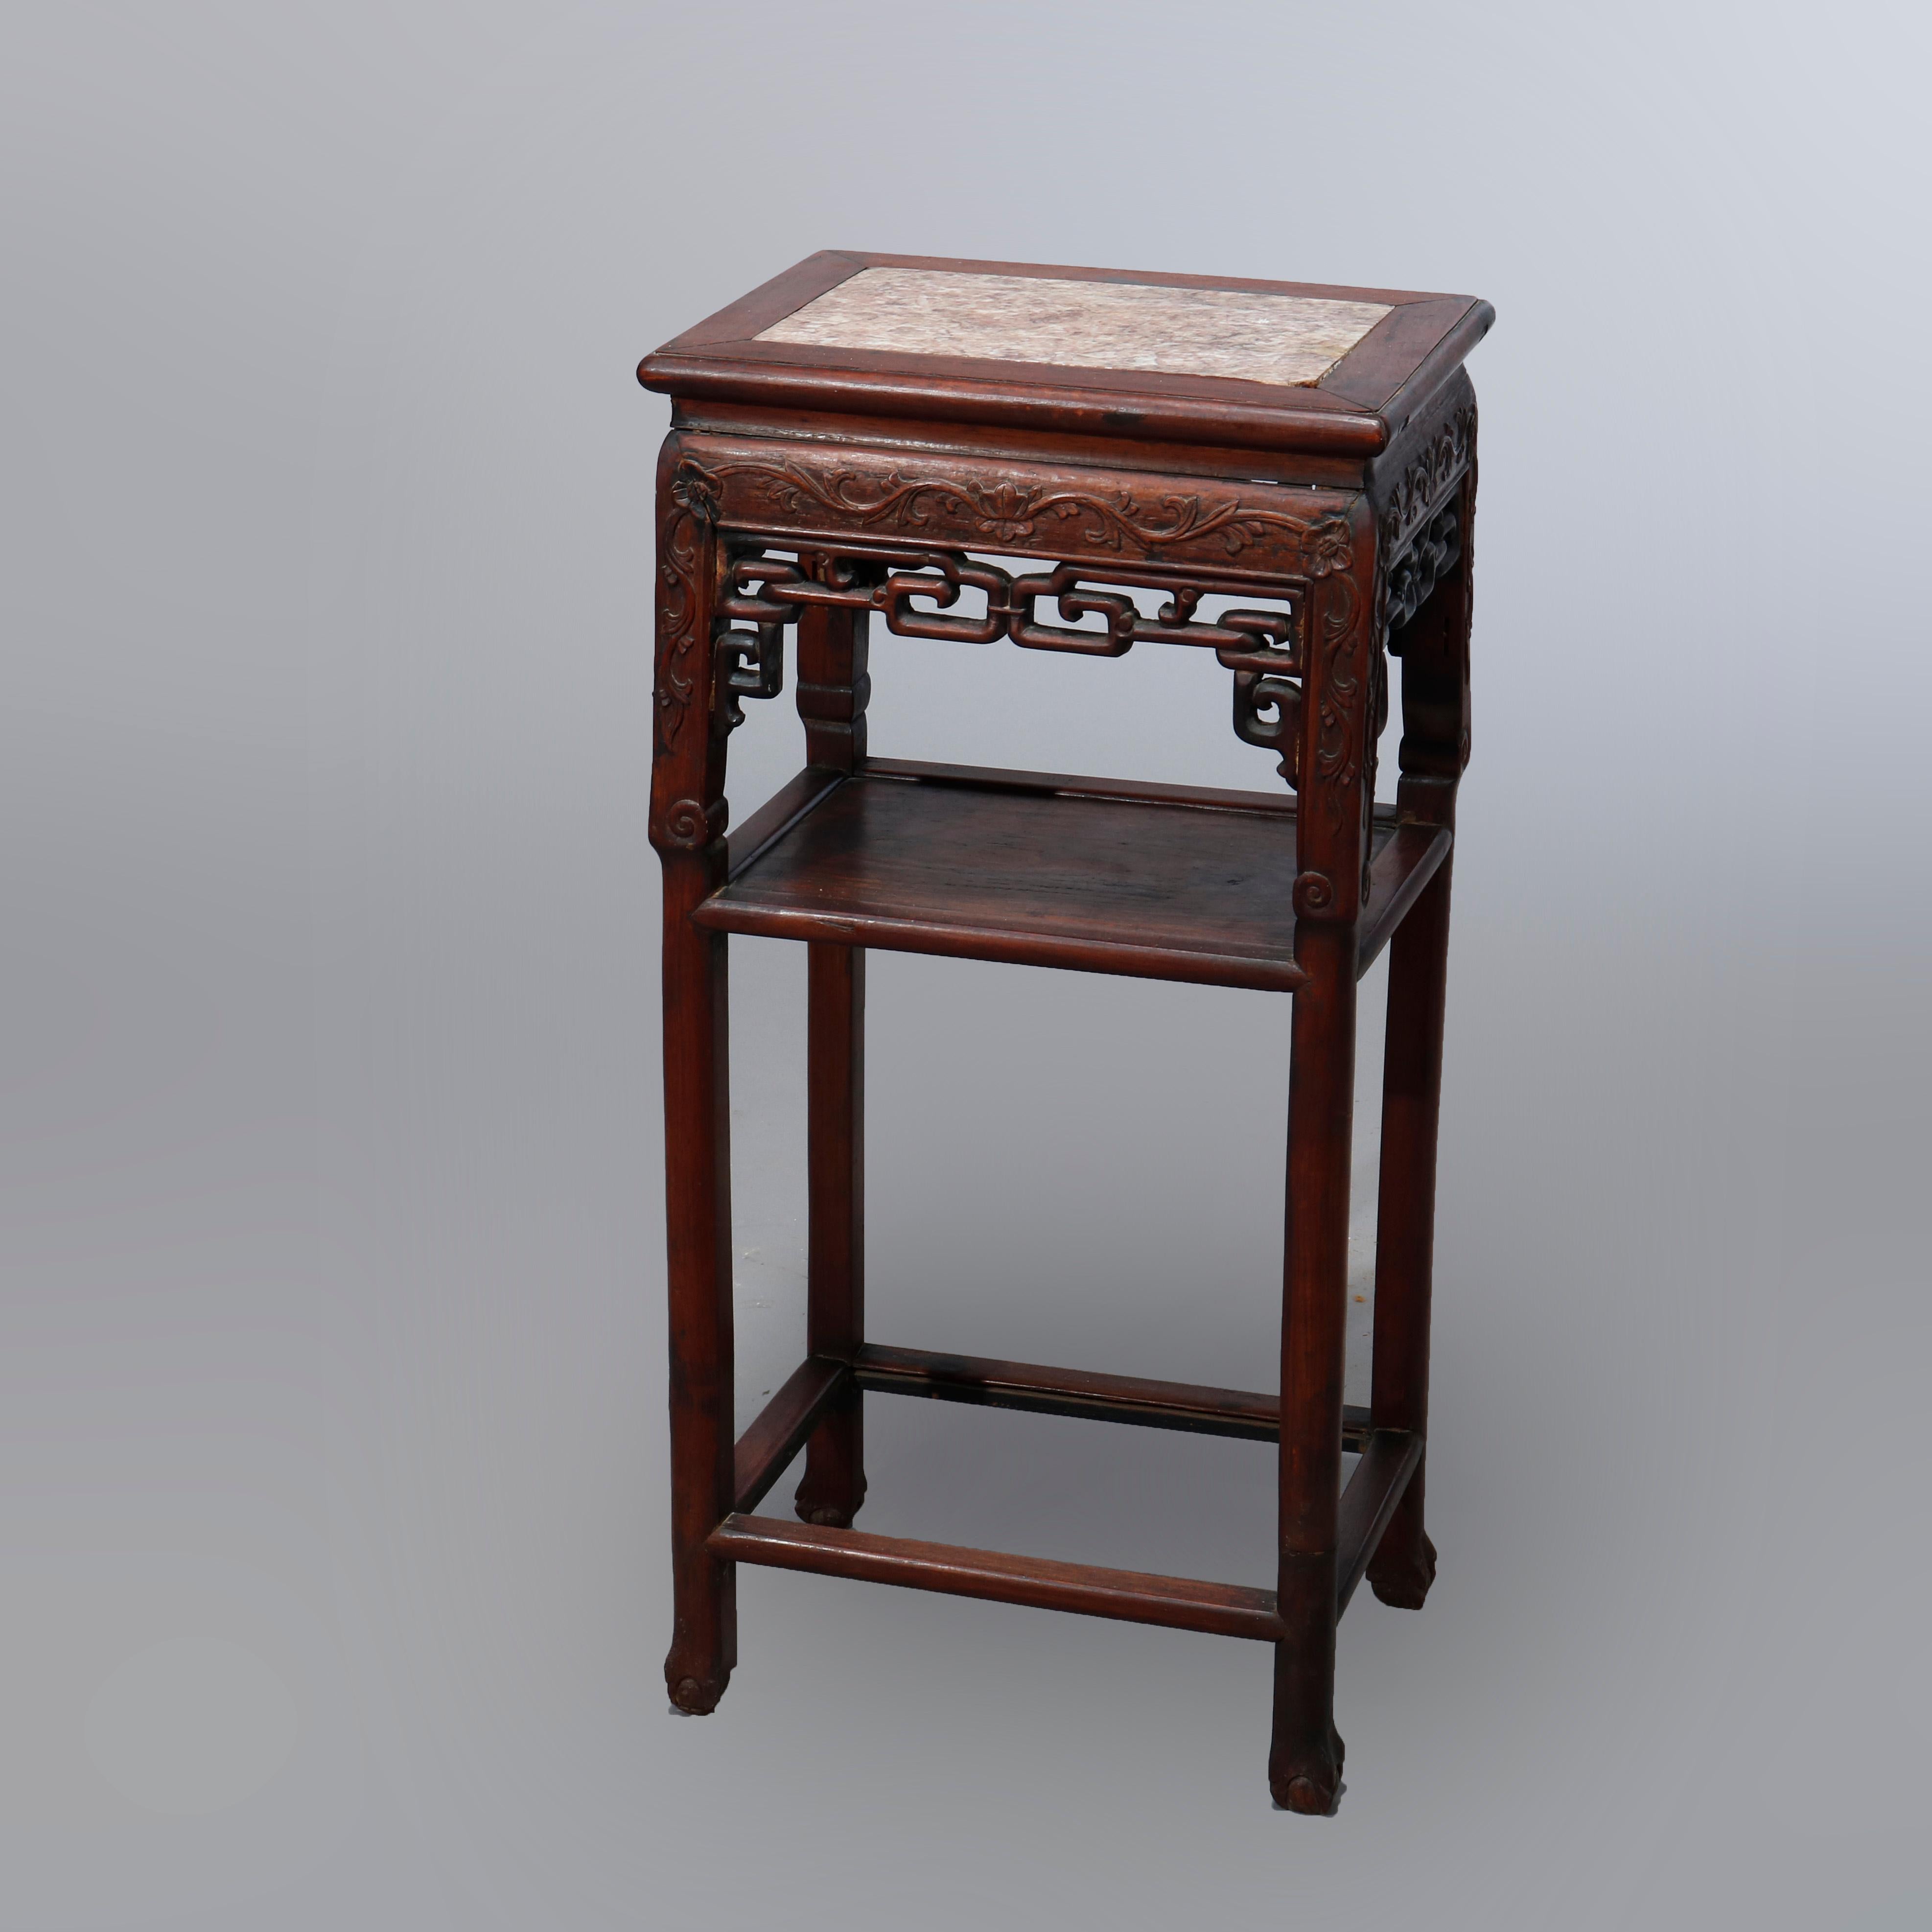 An antique Chinese plant stand offers rosewood construction with inset marble top over frame with foliate carved and pierced skirt over lower display shelf and having stylized claw and ball feet, 19th century

Measures: 32.75